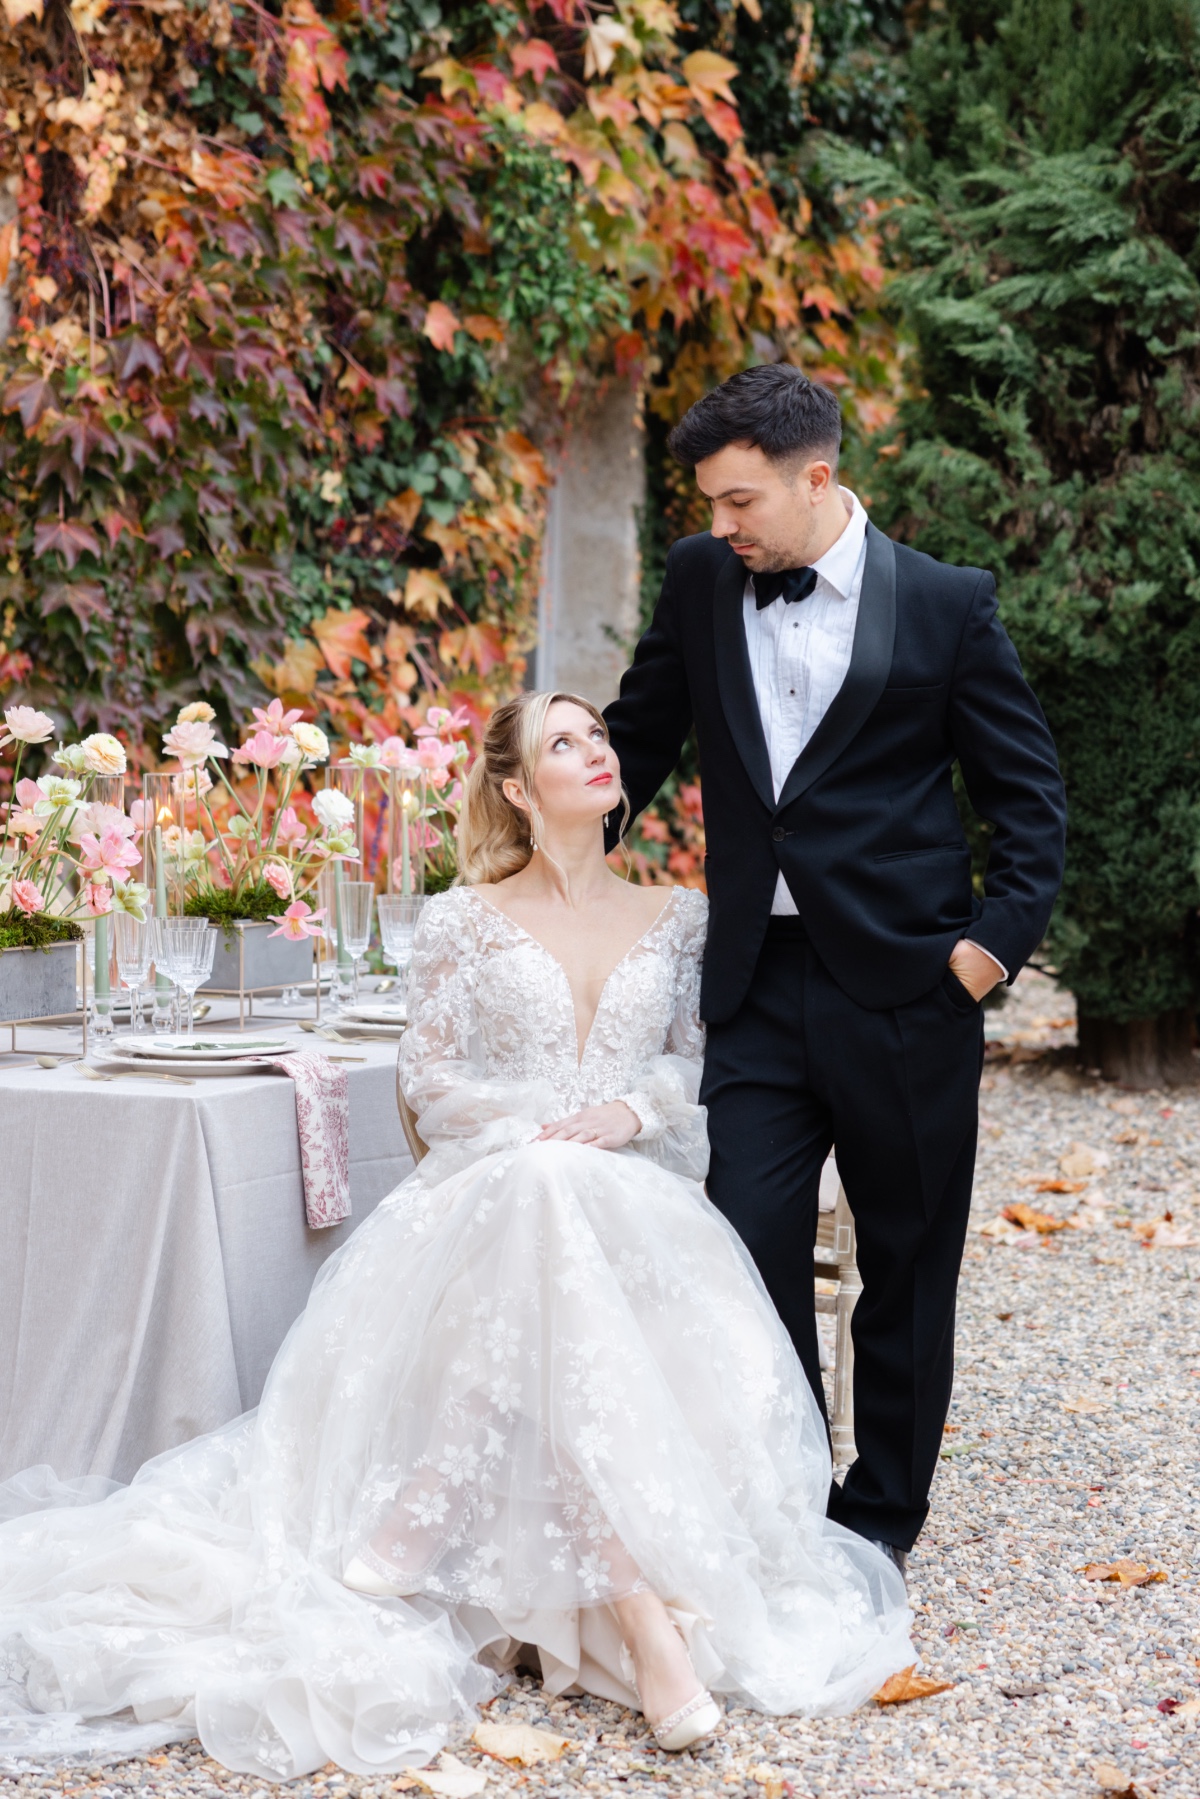 Timeless couple at destination wedding in France in autumn